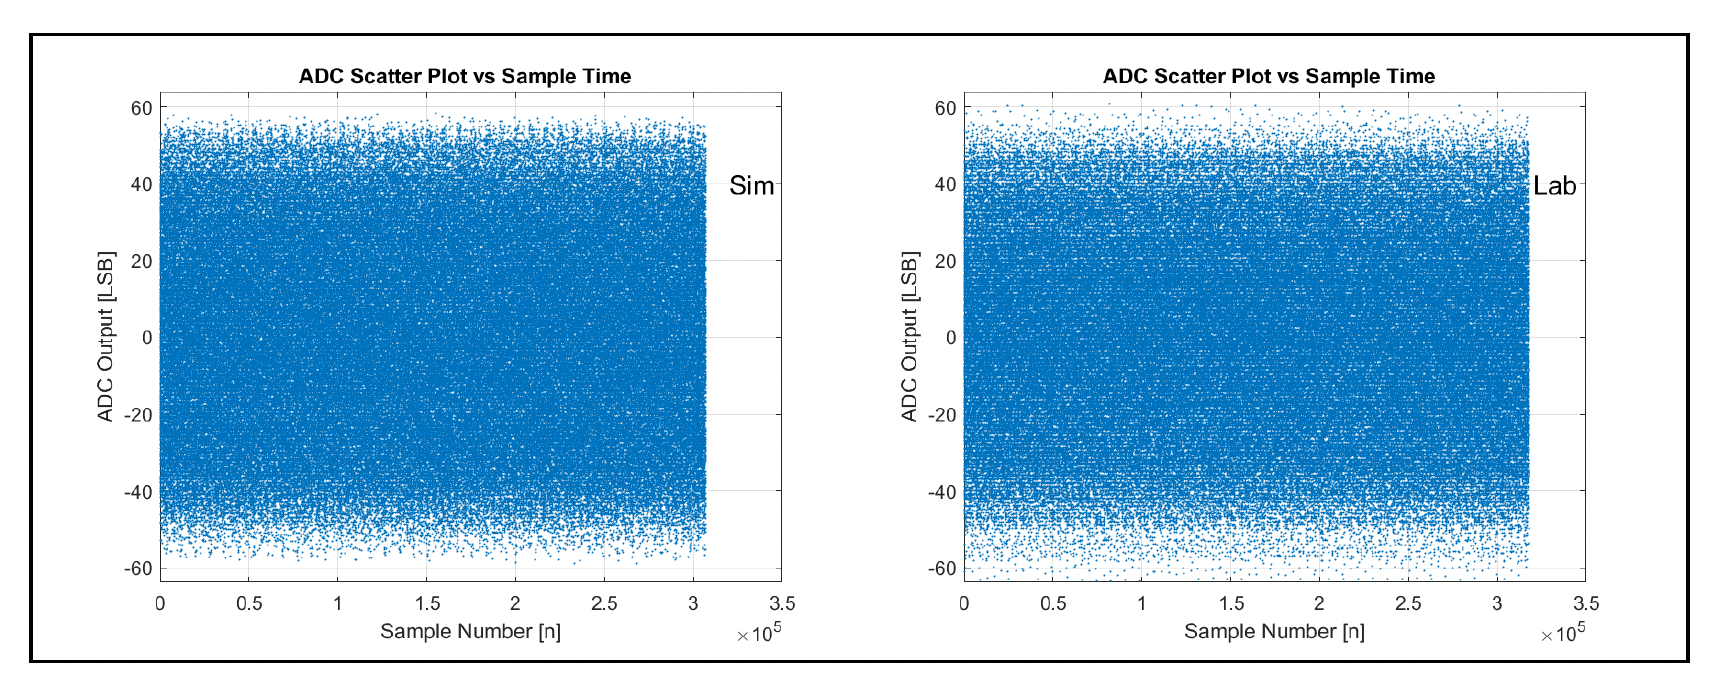 Simulation and Silicon ADC outpit scatter plot 1.6Tbps Era